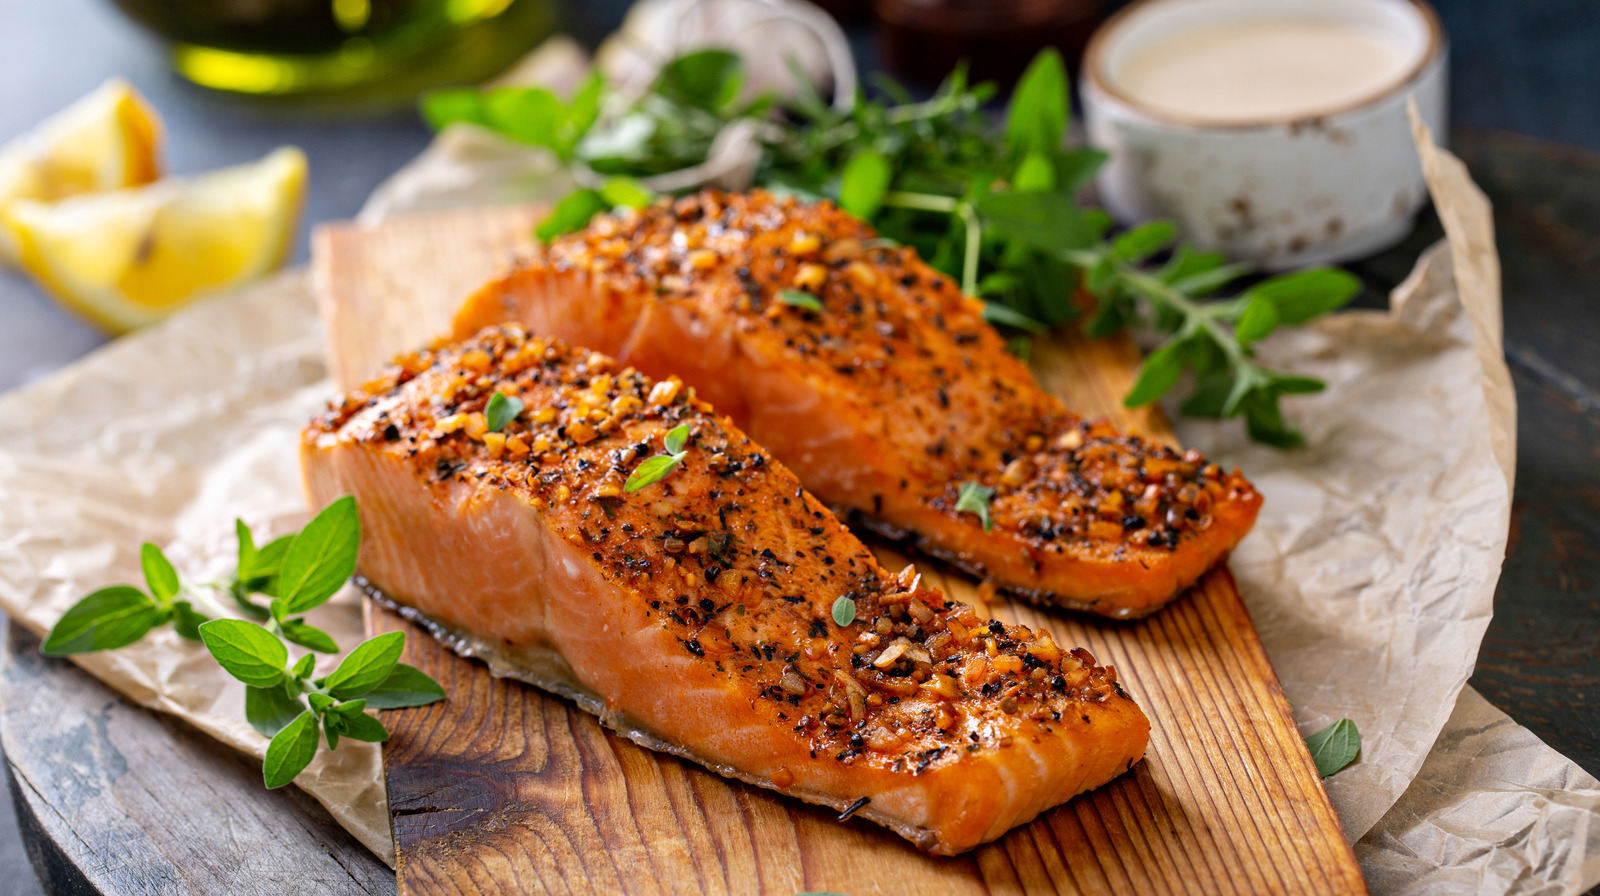 Why Cooking Salmon Fillets Close To Each Other Helps Them Retain Moisture